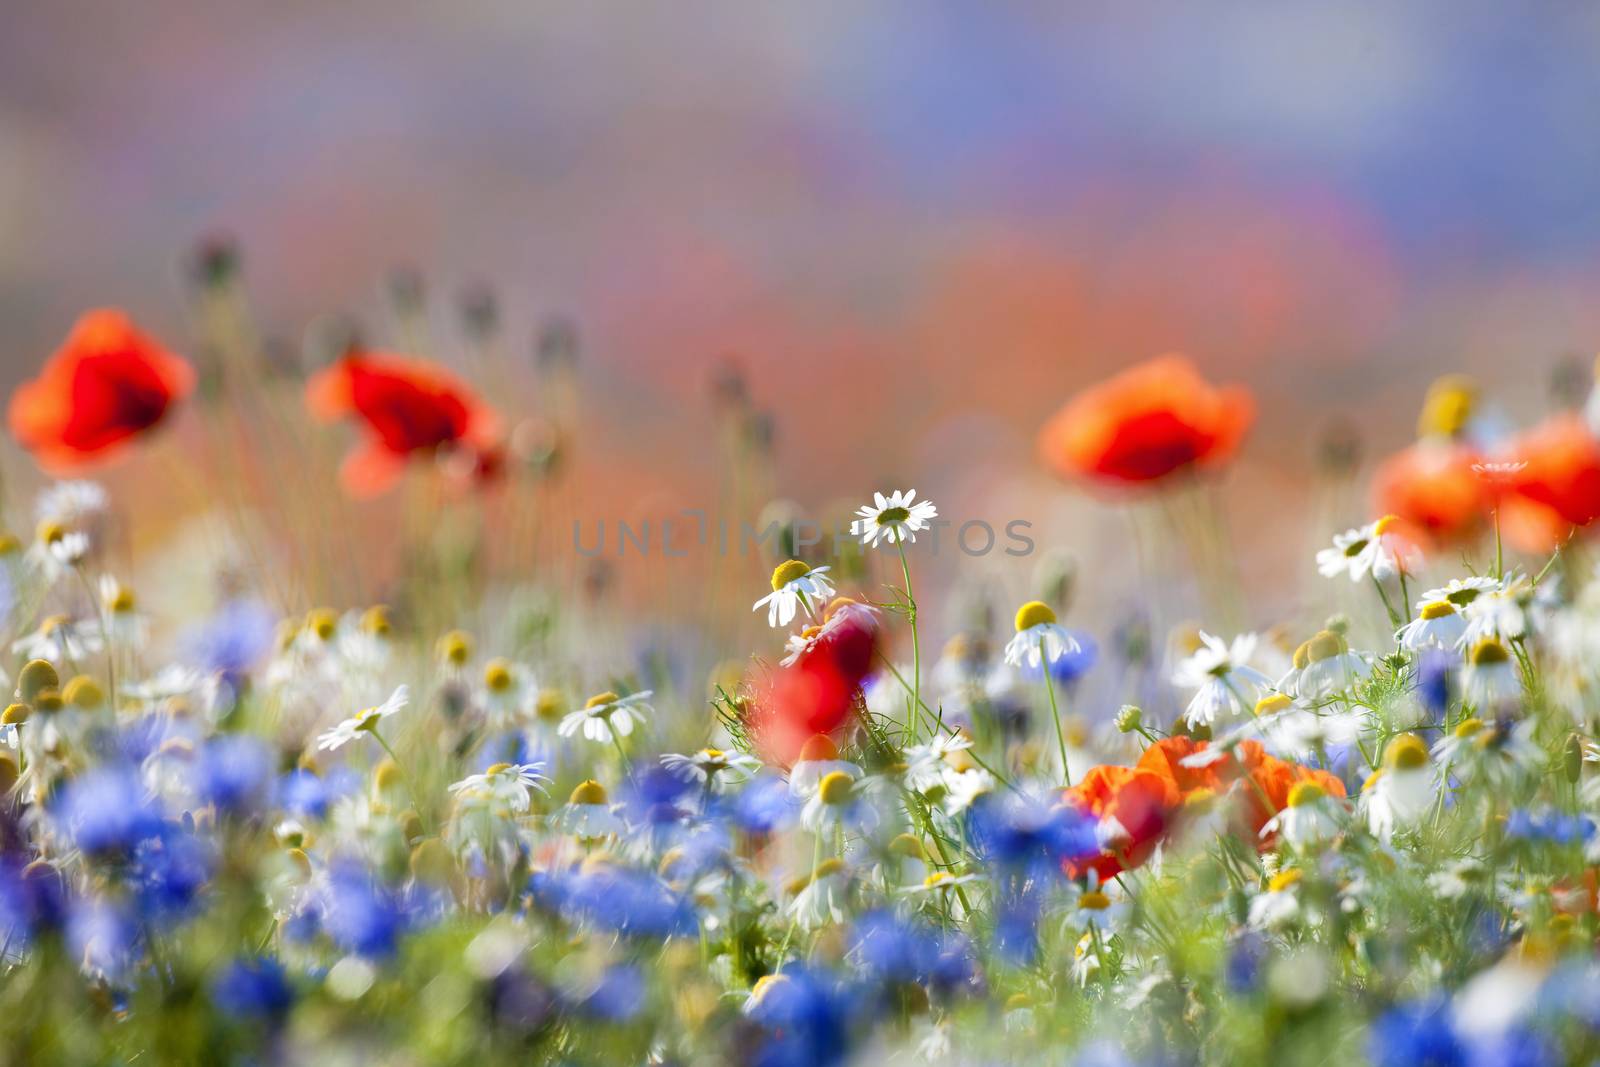 abundance of blooming wild flowers on the meadow at spring time